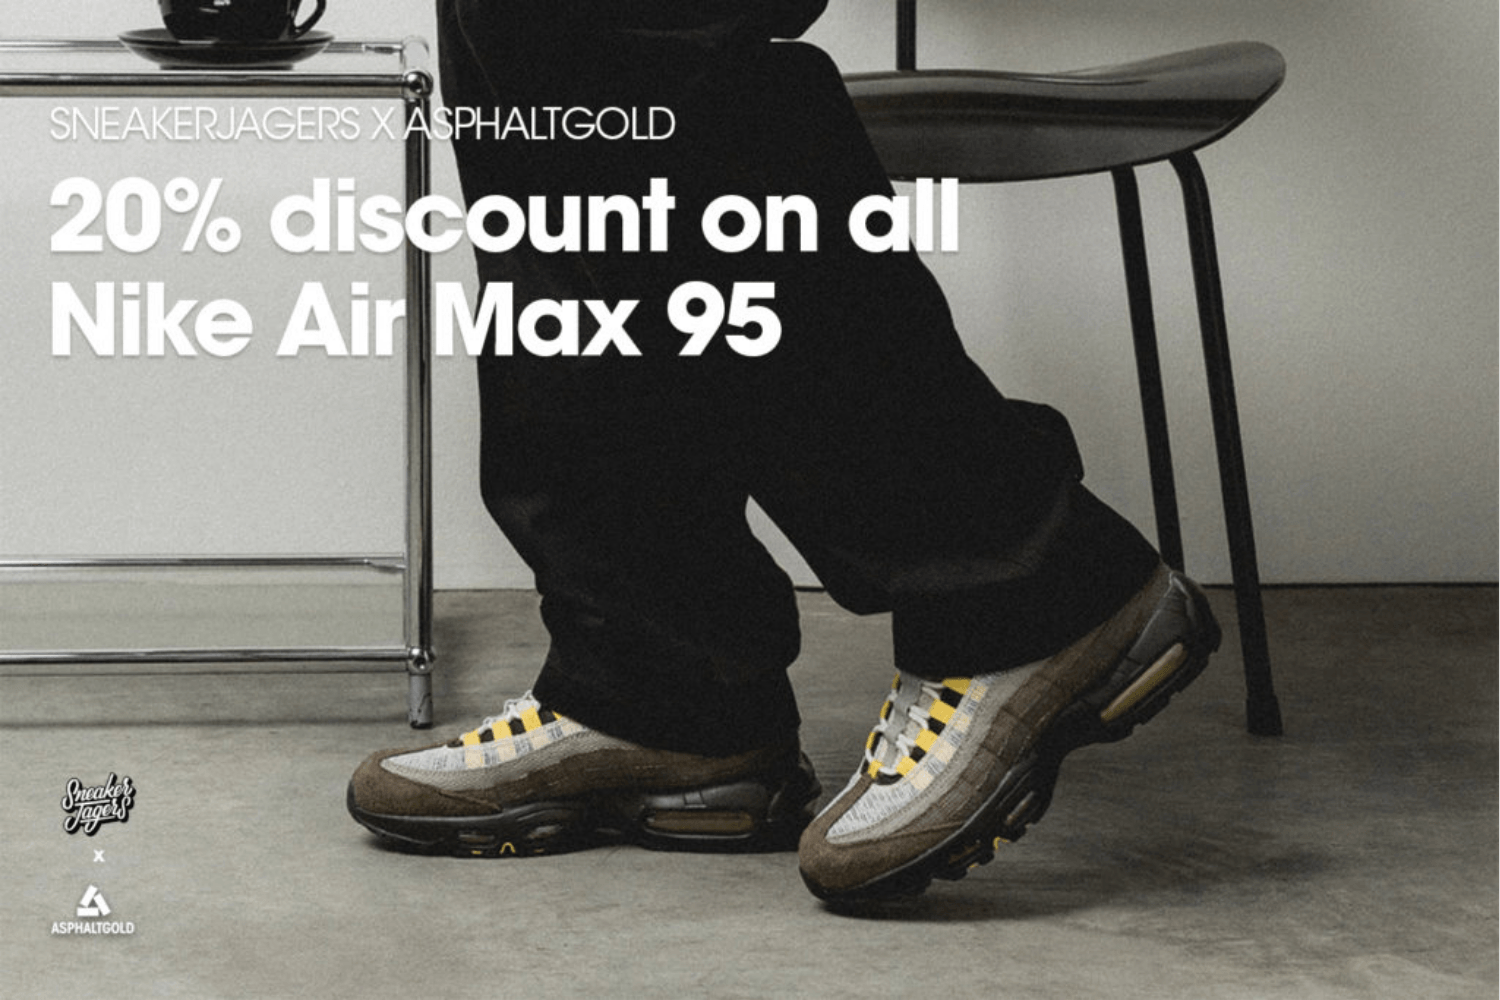 Sneakerjagers presents a discount on all Air Max 95 models at Asphaltgold